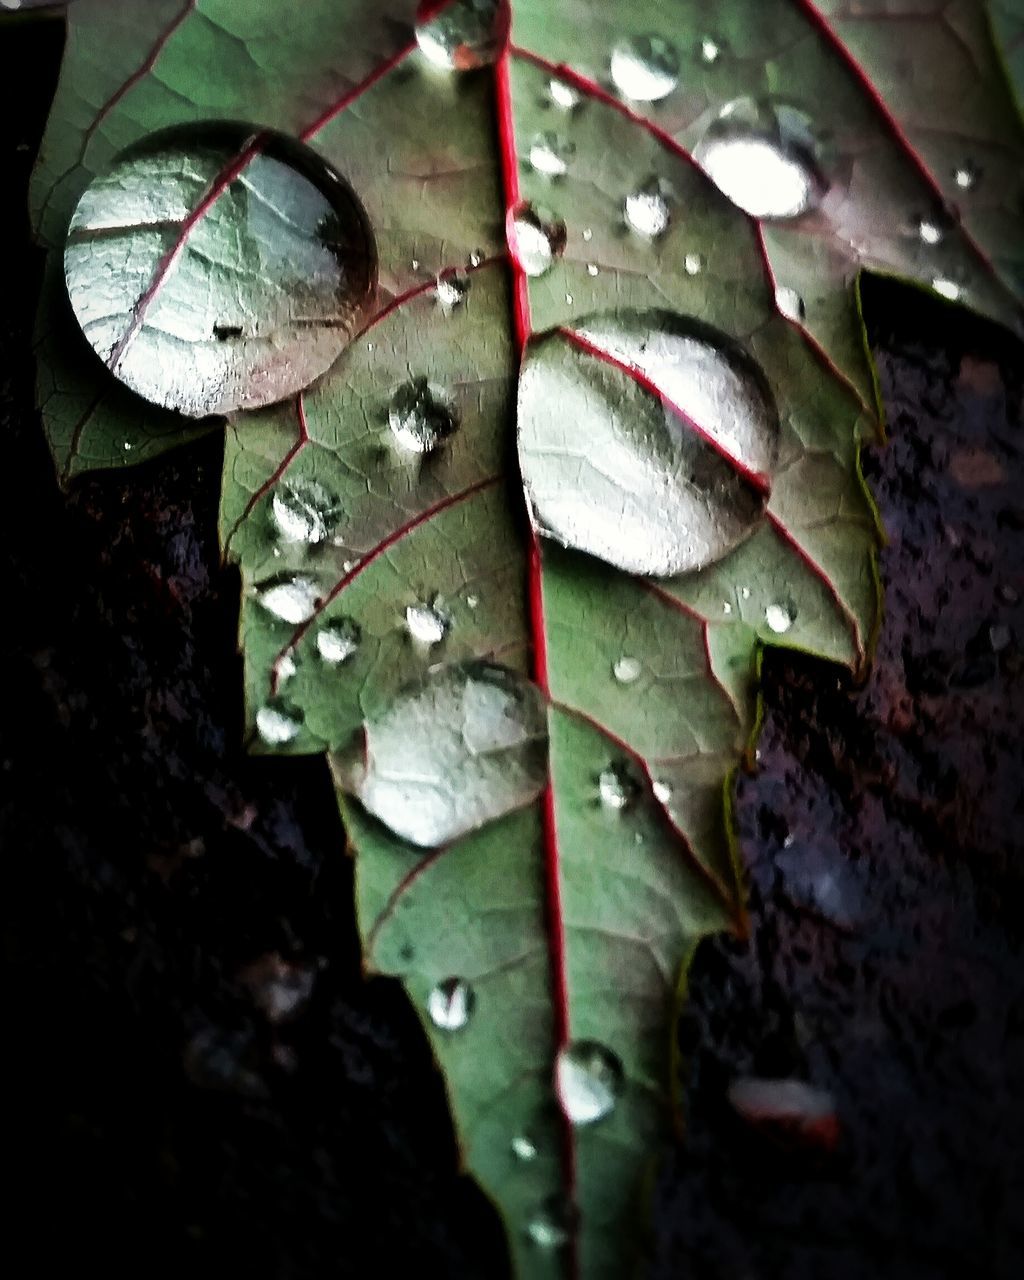 leaf, wet, nature, water, drop, close-up, rain, beauty in nature, fragility, no people, maple, outdoors, autumn, purity, maple leaf, raindrop, growth, day, rainy season, freshness